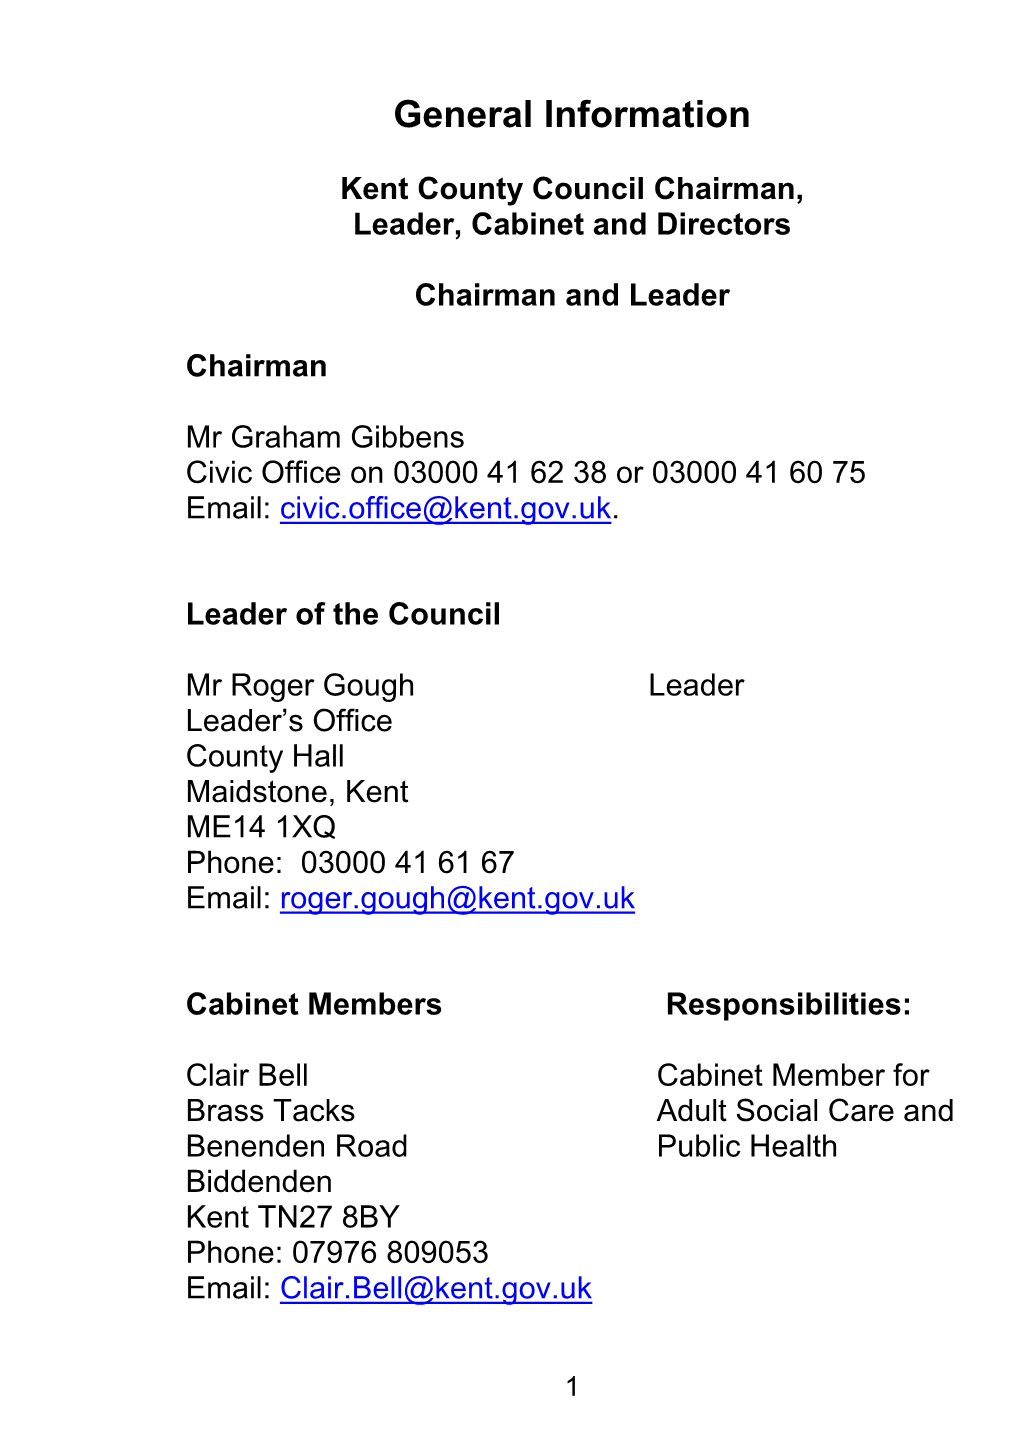 Kent County Council Chairman, Leader, Cabinet and Directors